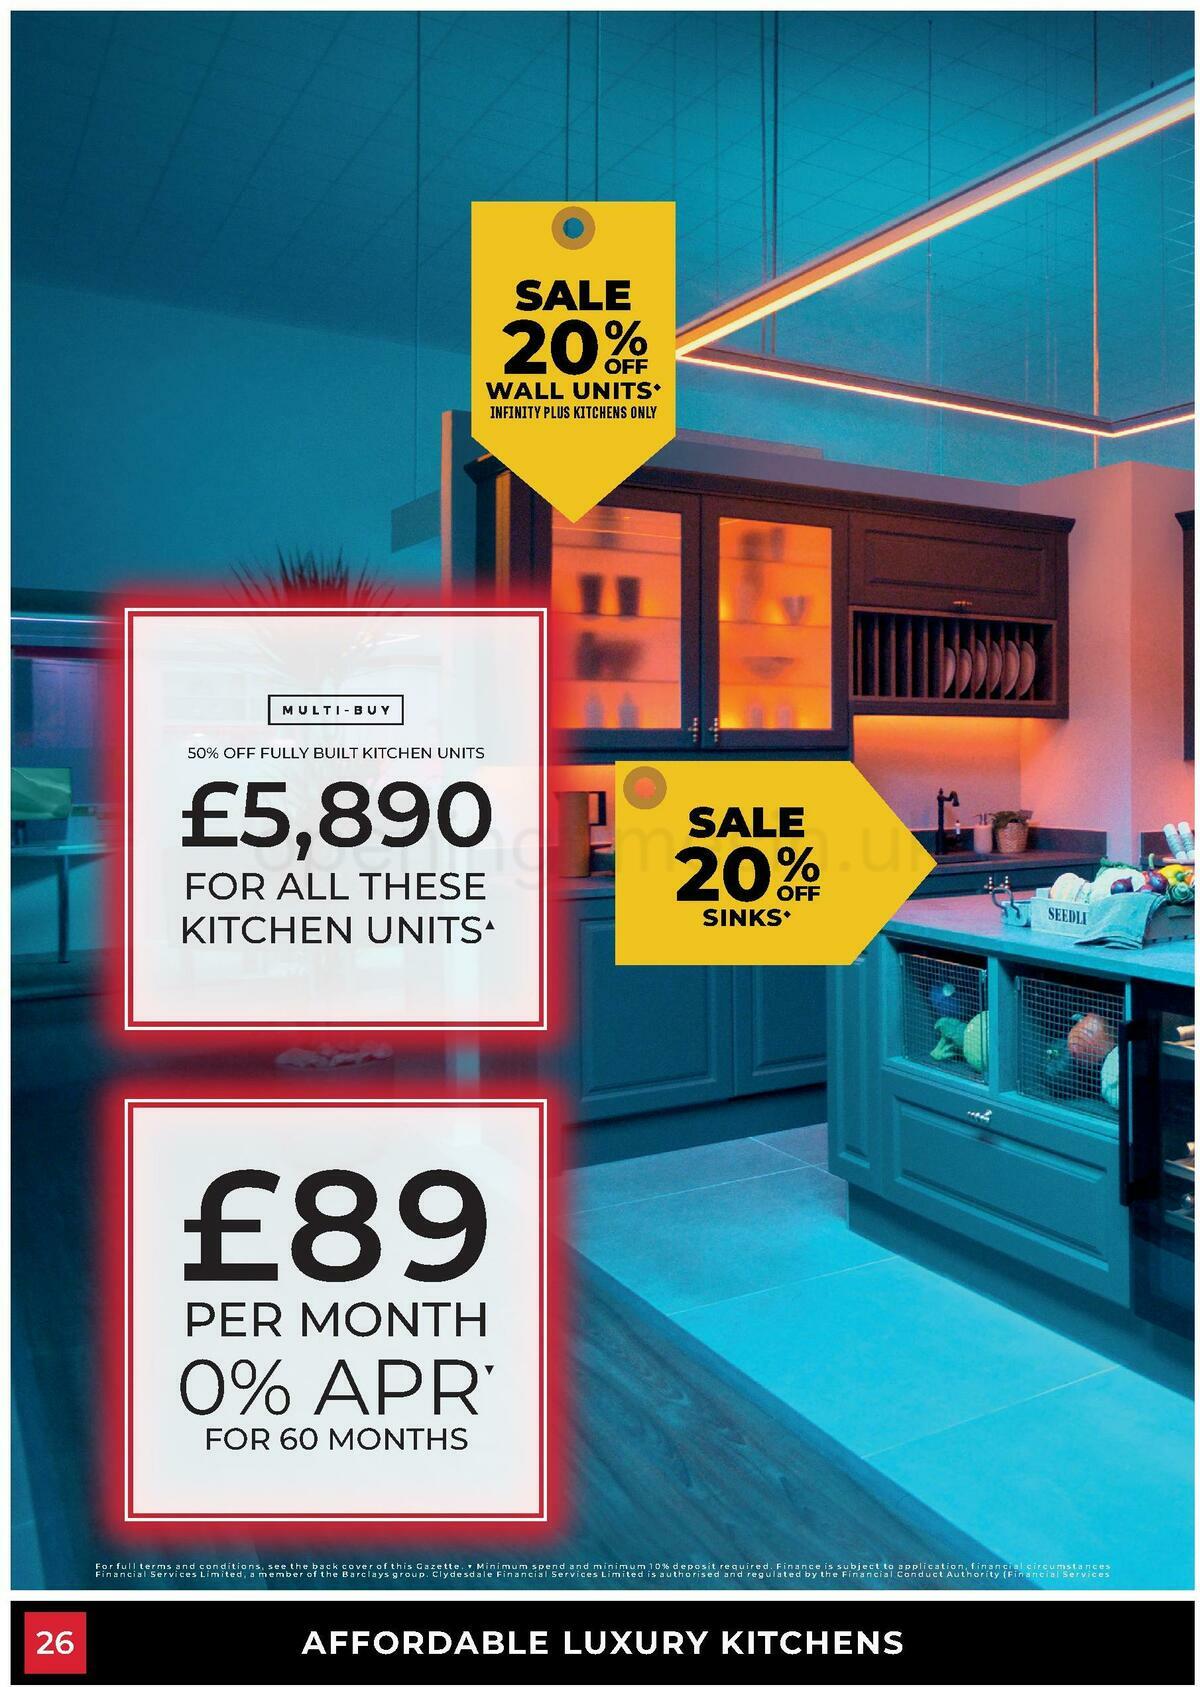 Wren Kitchens Offers from 31 March